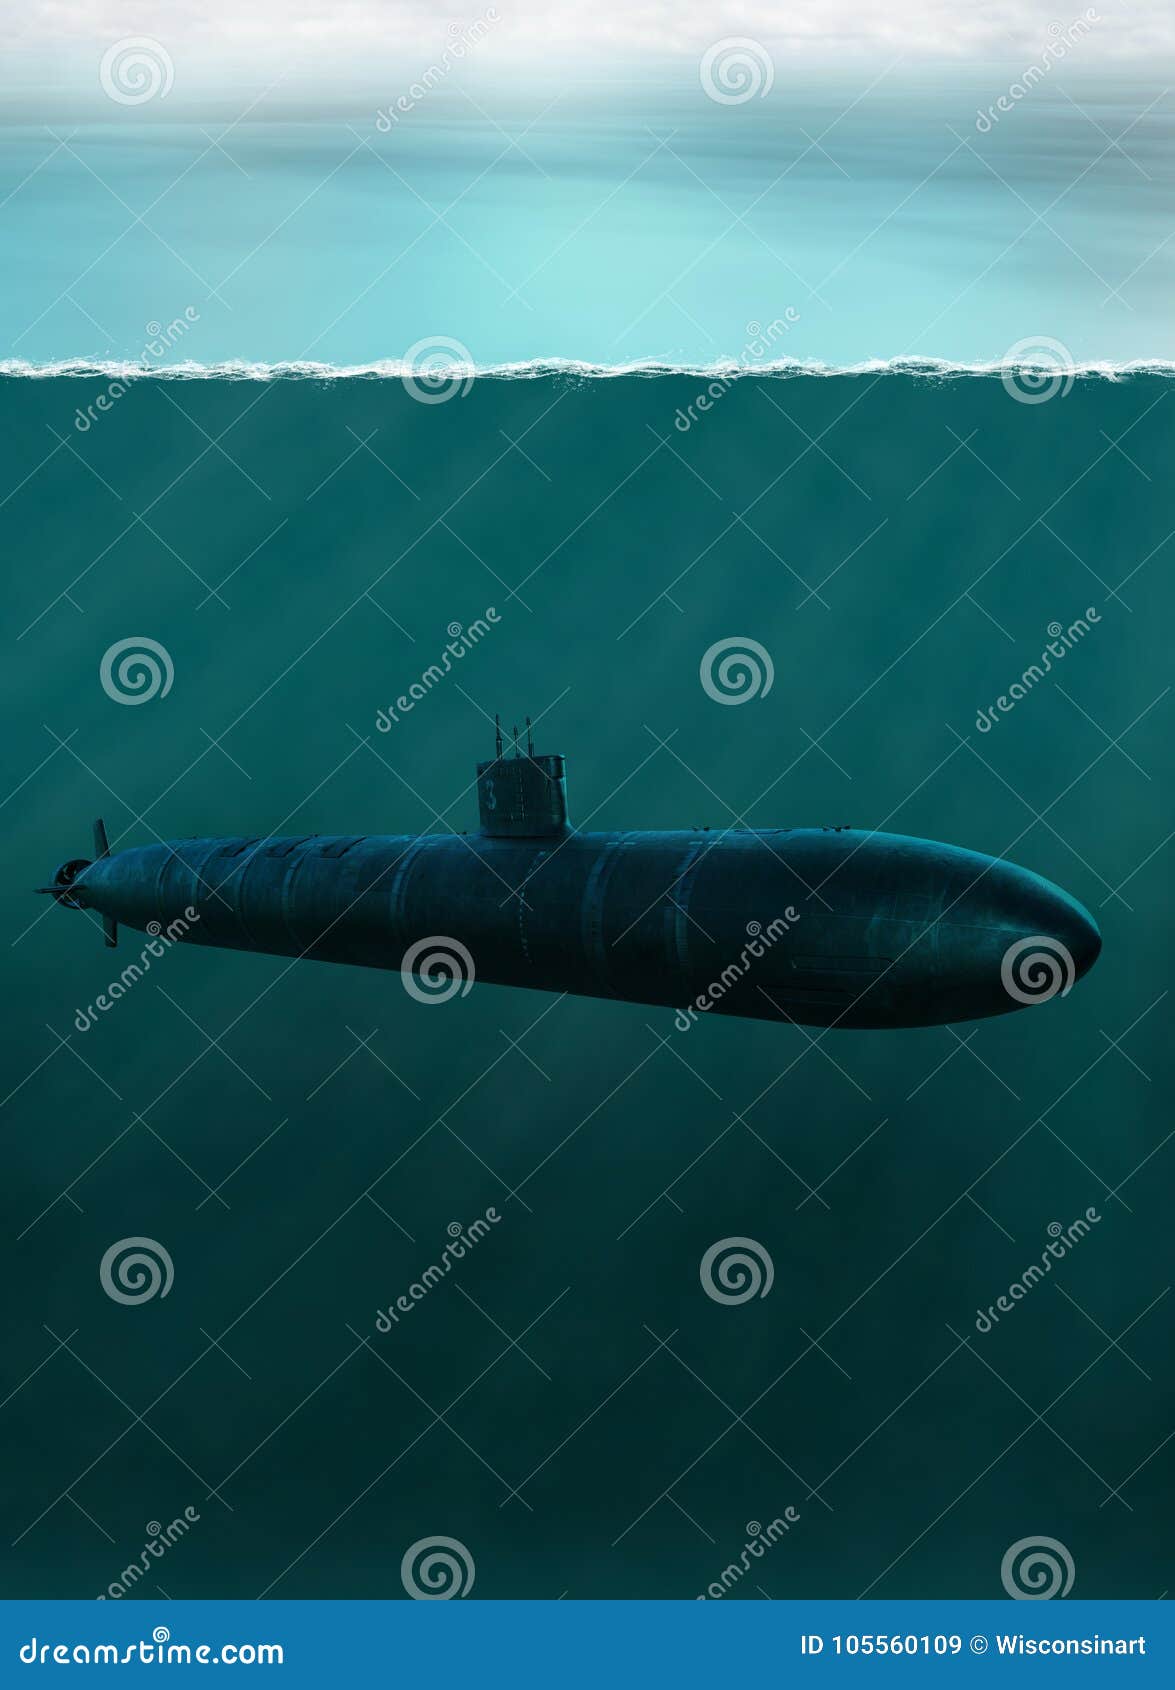 military nuclear submarine ship, underwater